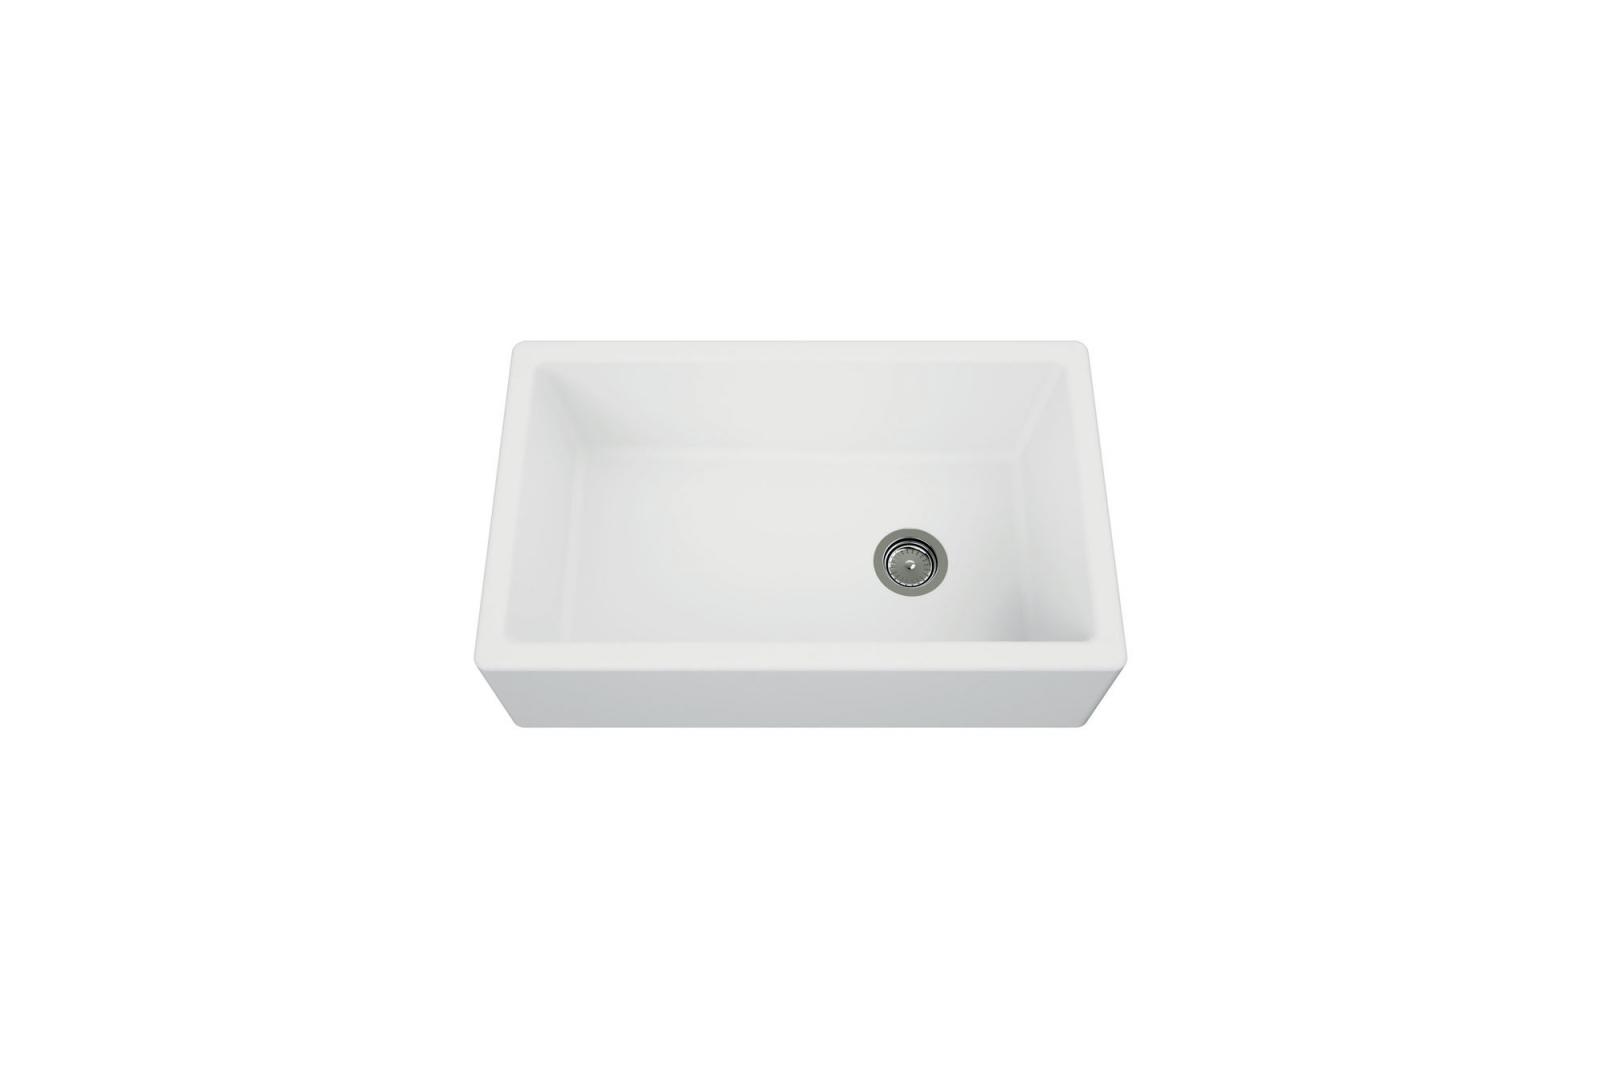 High-quality sink Philippe granit white - one bowl